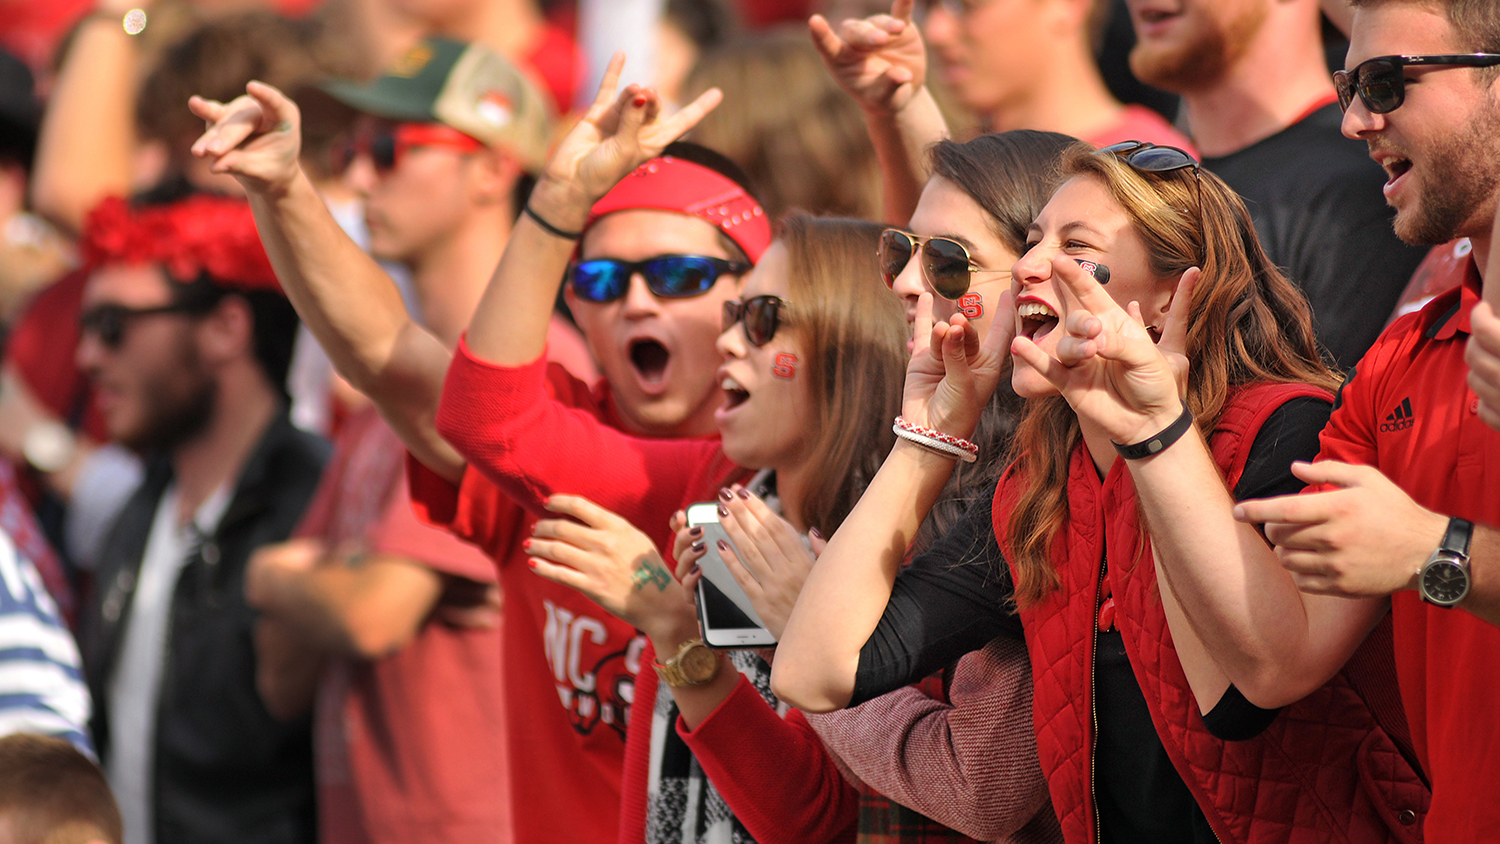 NC State students showing their school spirit at a wolfpack game